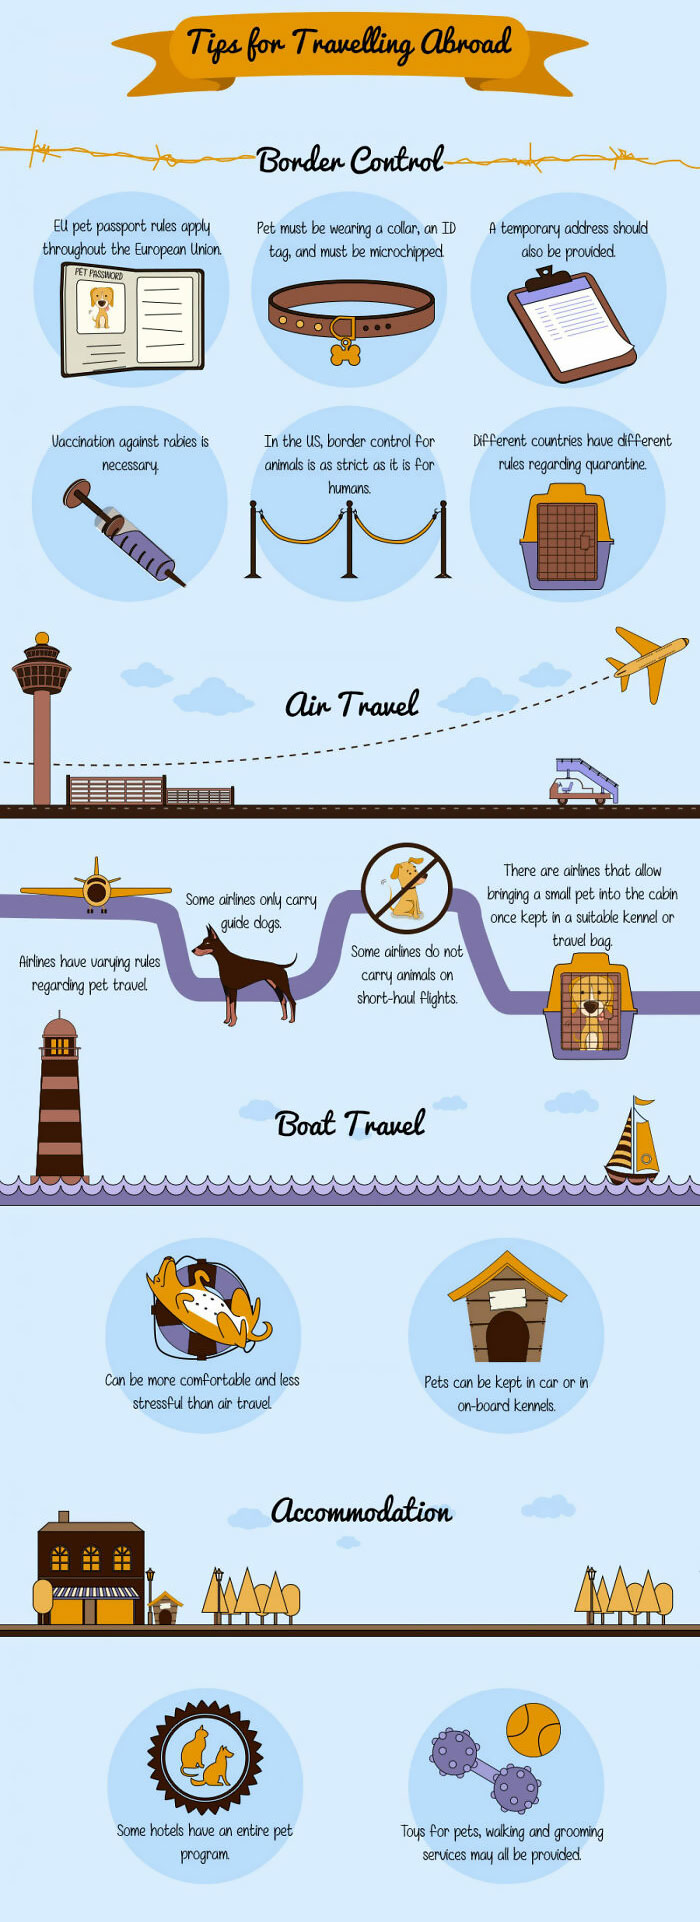 A Guide To Pet Travel